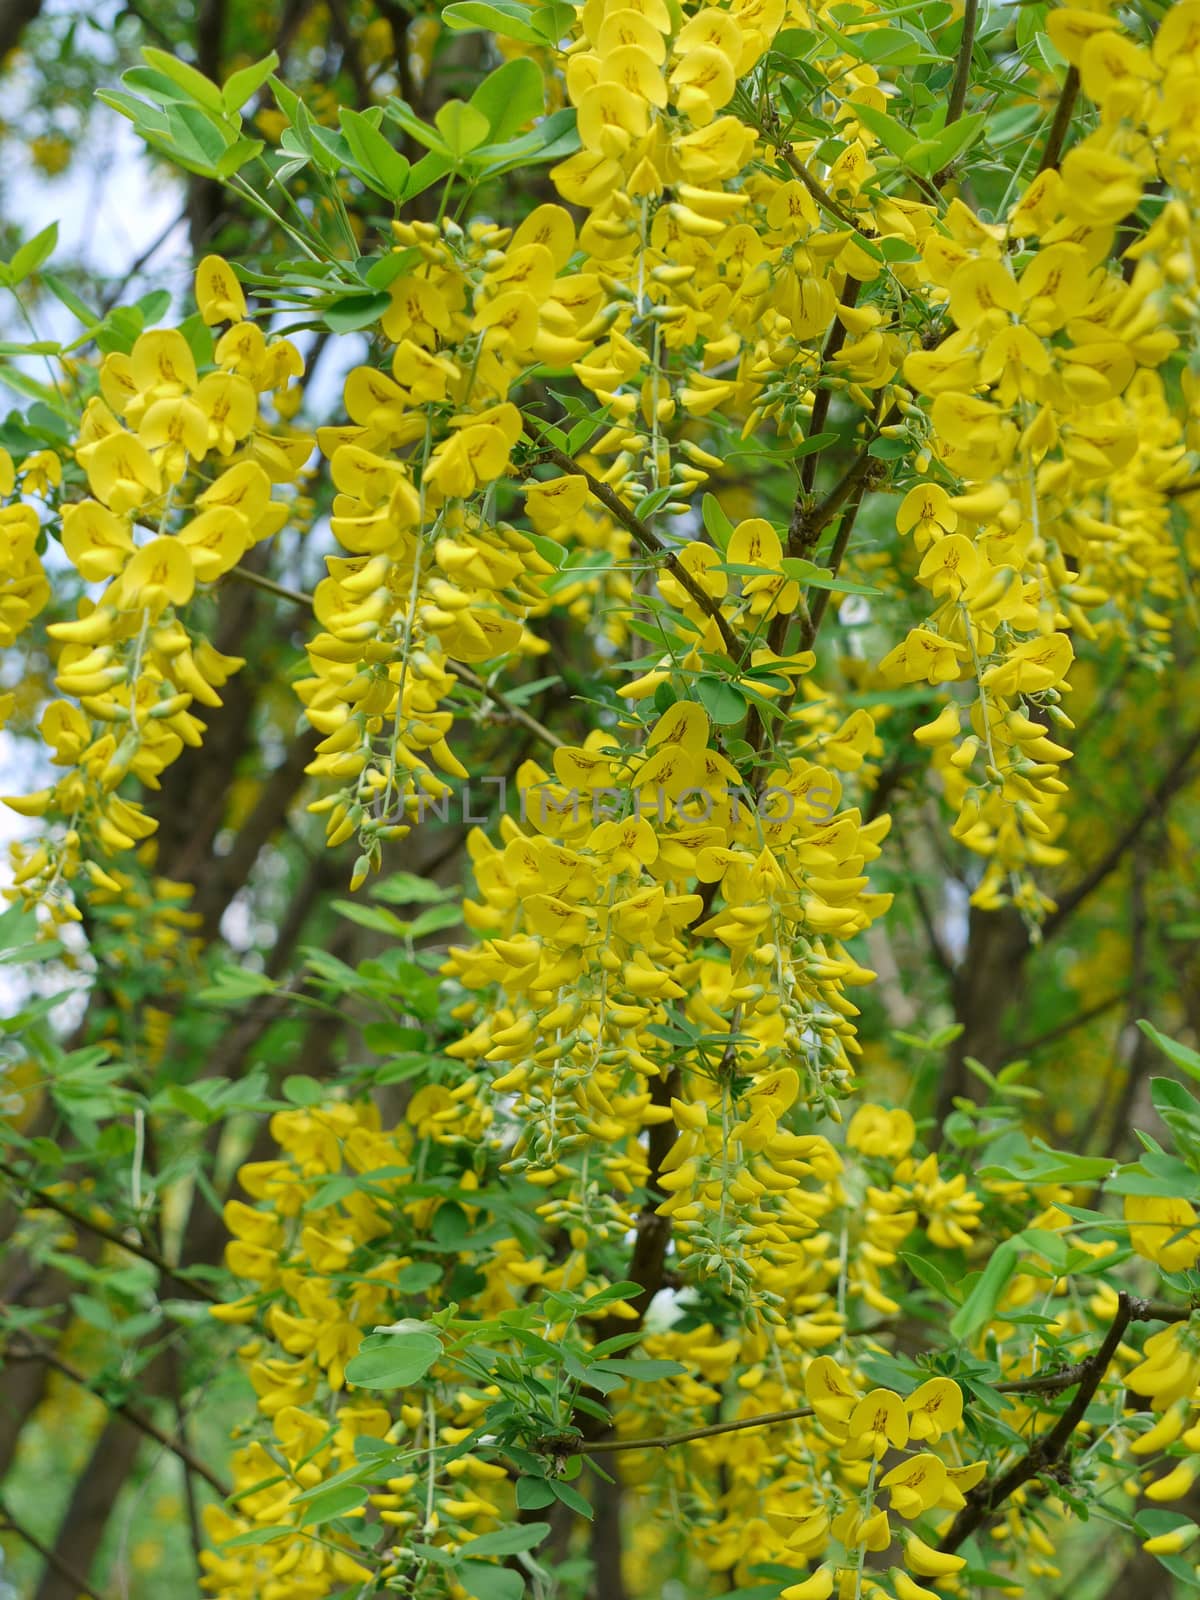 Beautiful bunches of yellow small flowers against the background of green trees